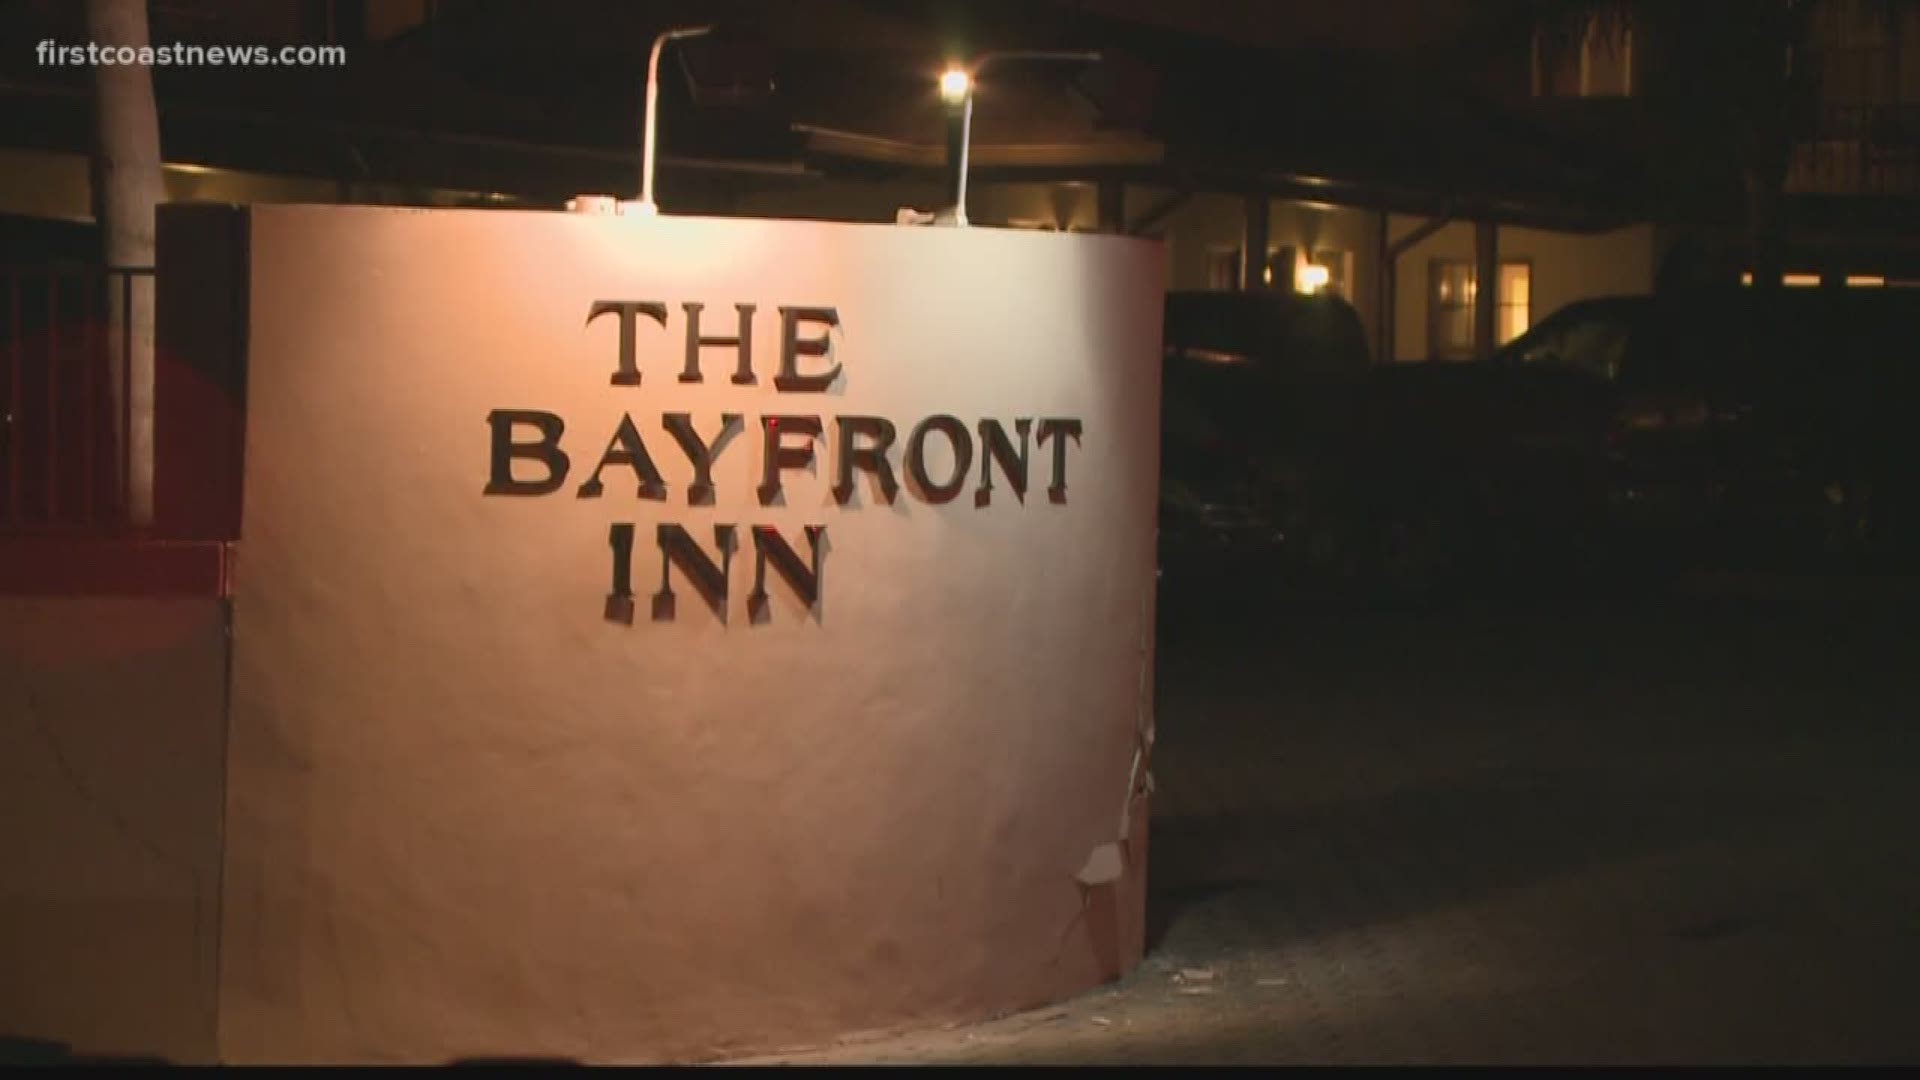 A man was arrested and charged with DUI and property damage after a vehicle crashed into at least eight others at The Bayfront Inn in St. Augustine overnight.